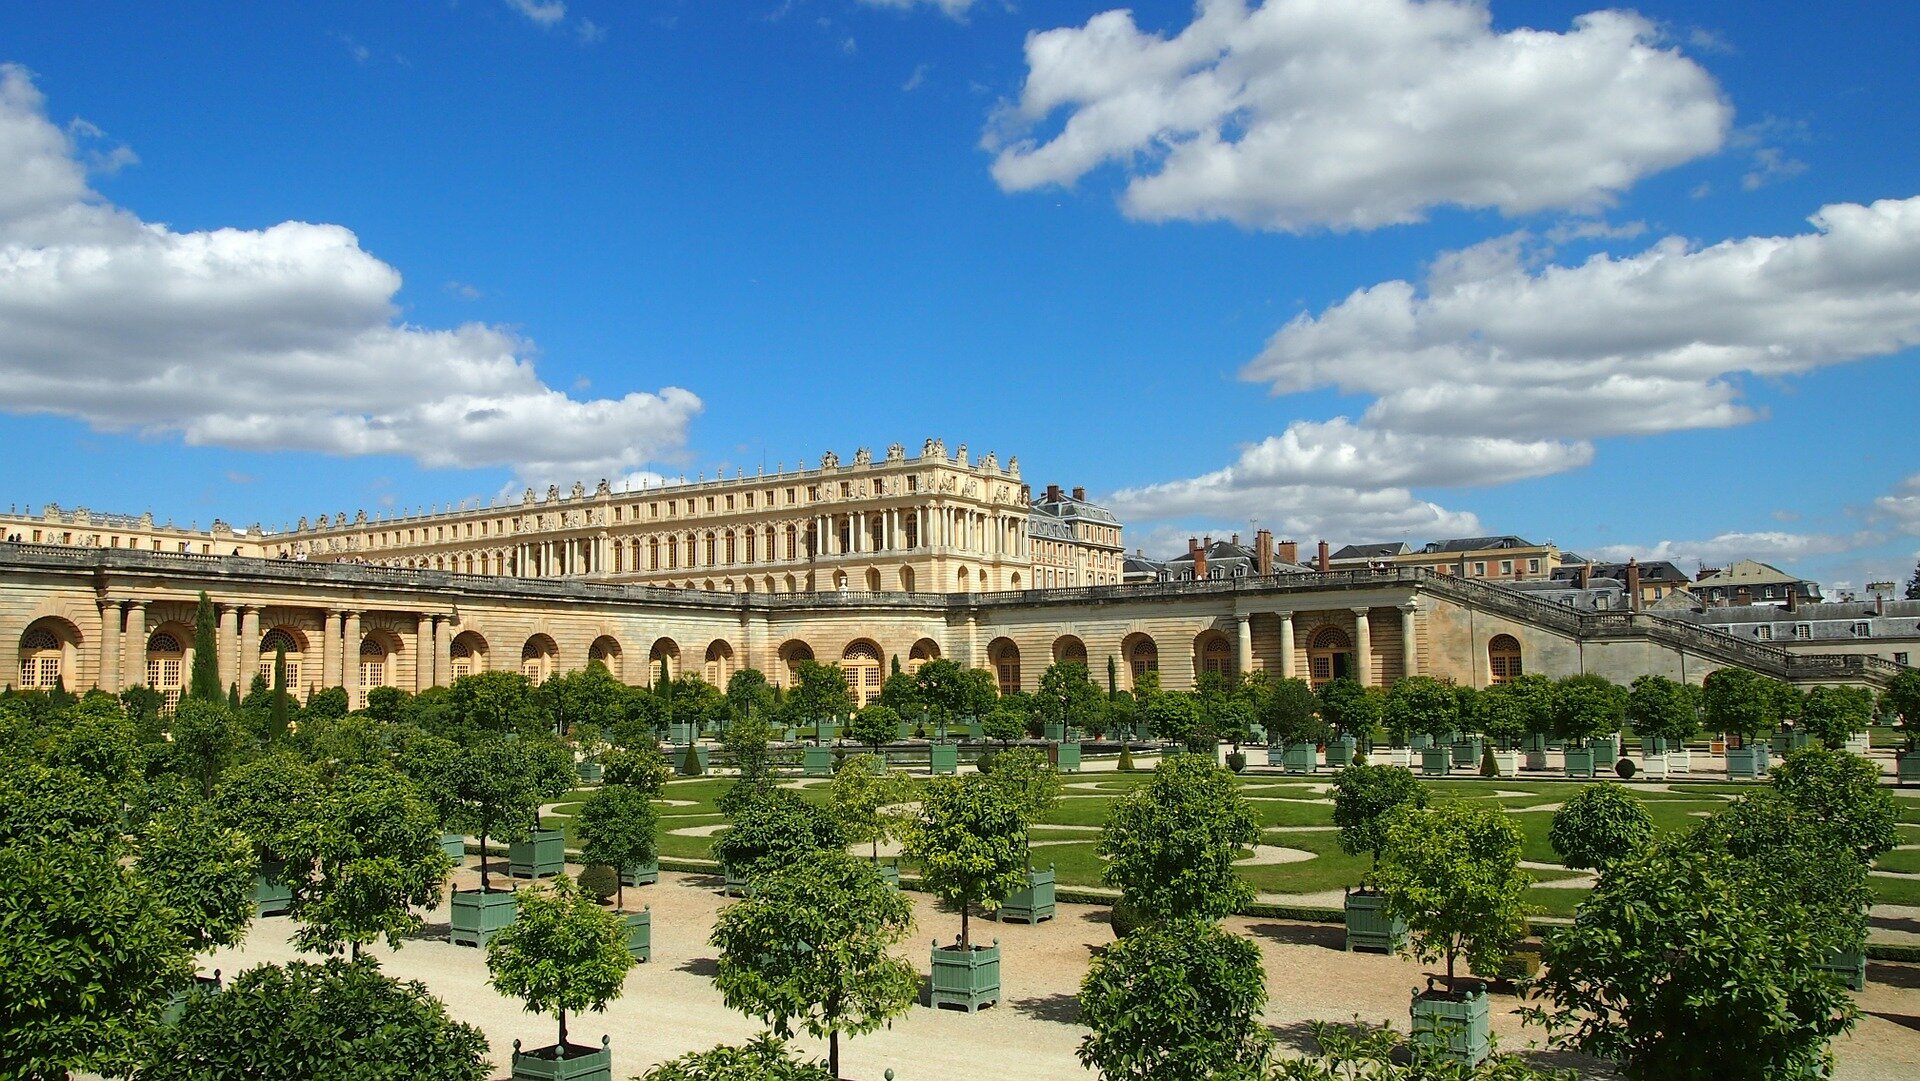 Visit the Palace of Versailles from your exceptional apartment